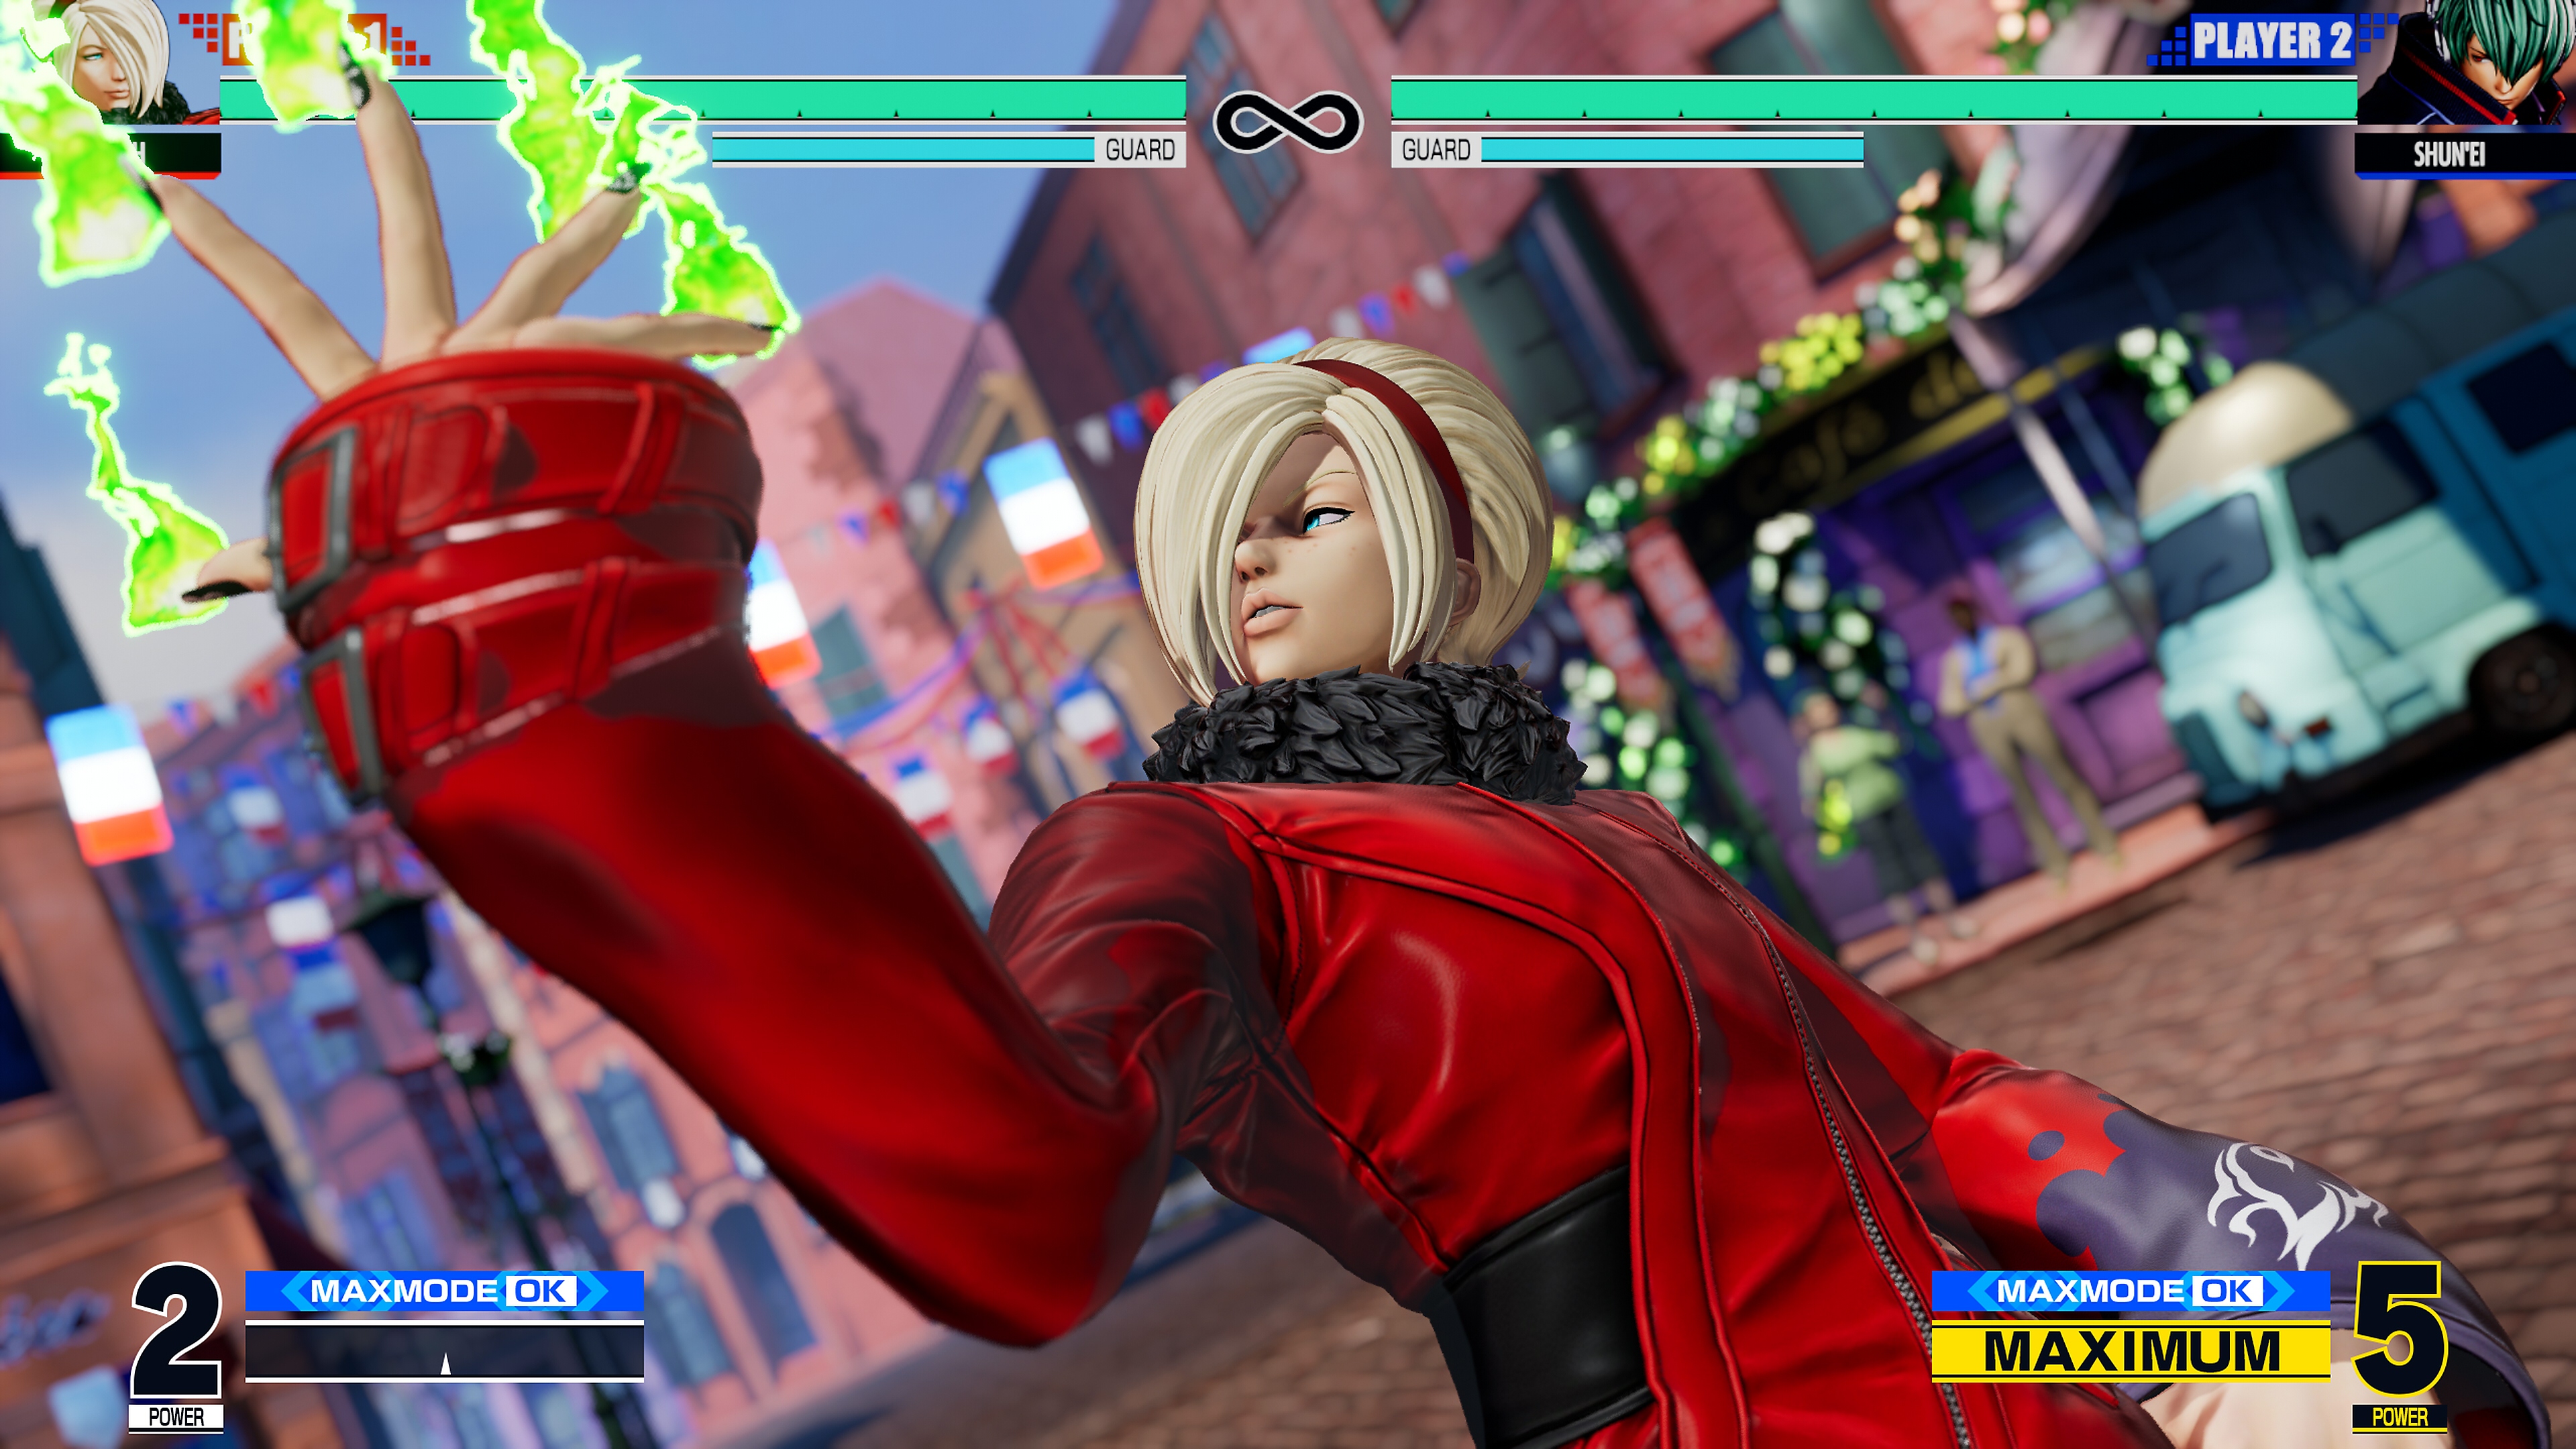 The King of Fighters XV - Gallery Screenshot 3